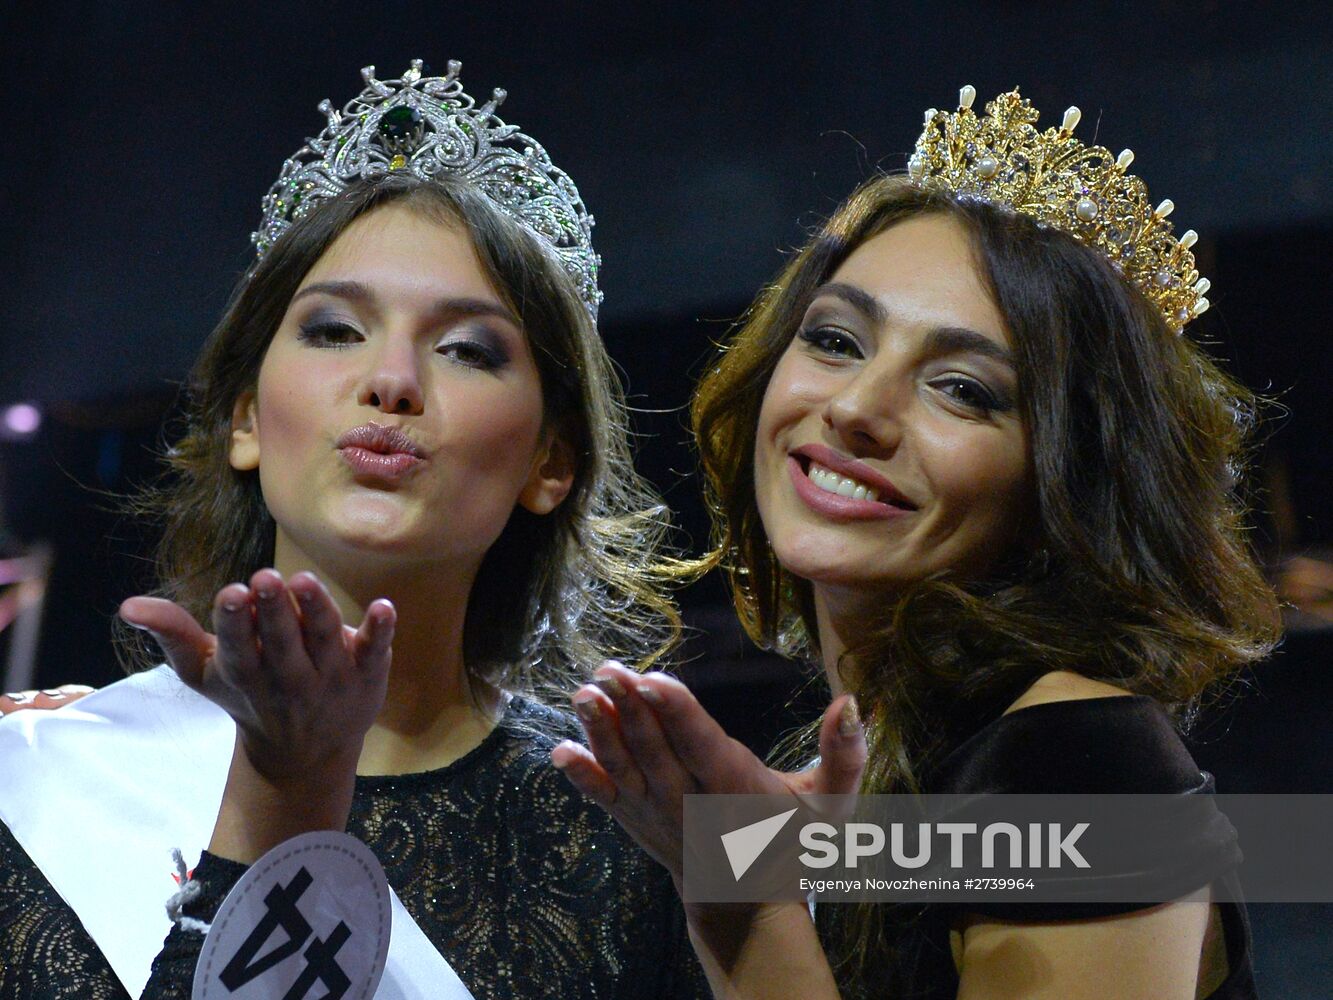 21st Russian Beauty National Talent and Beauty Festival